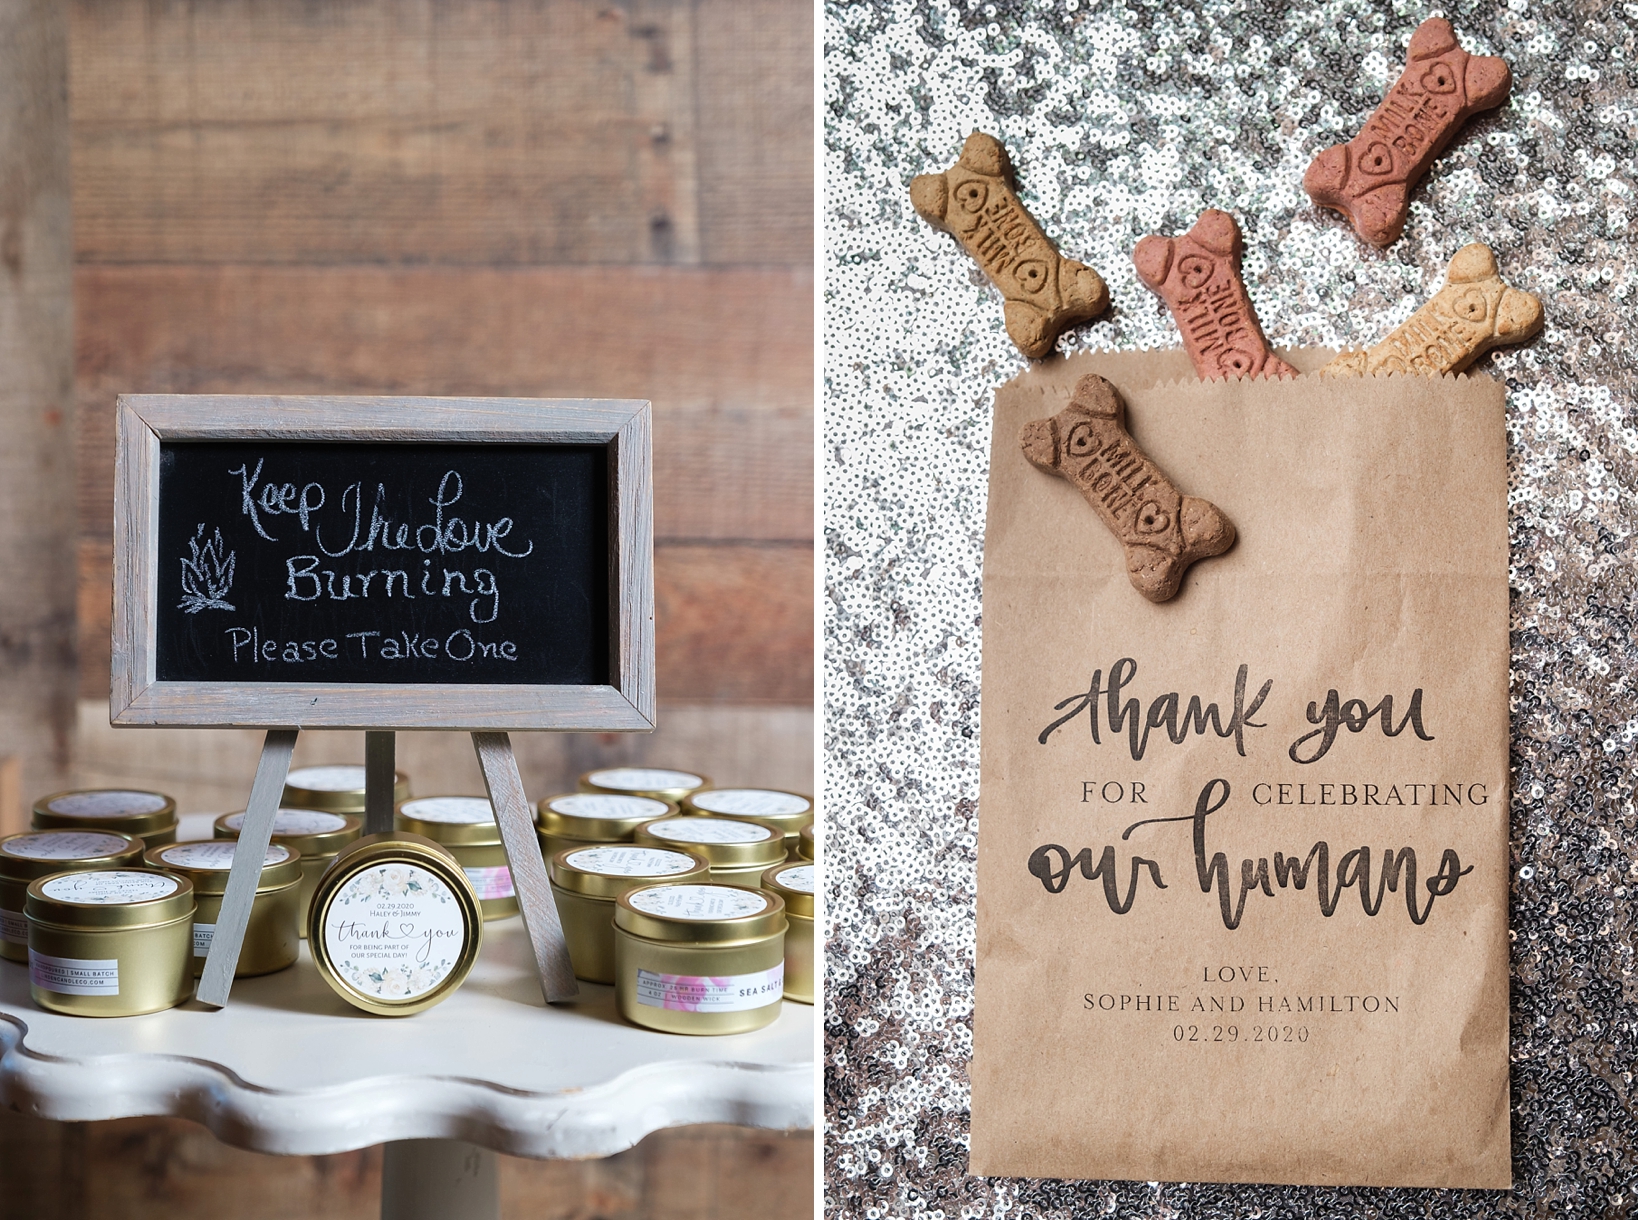 Wedding gifts of candles and dog treats set out during the reception